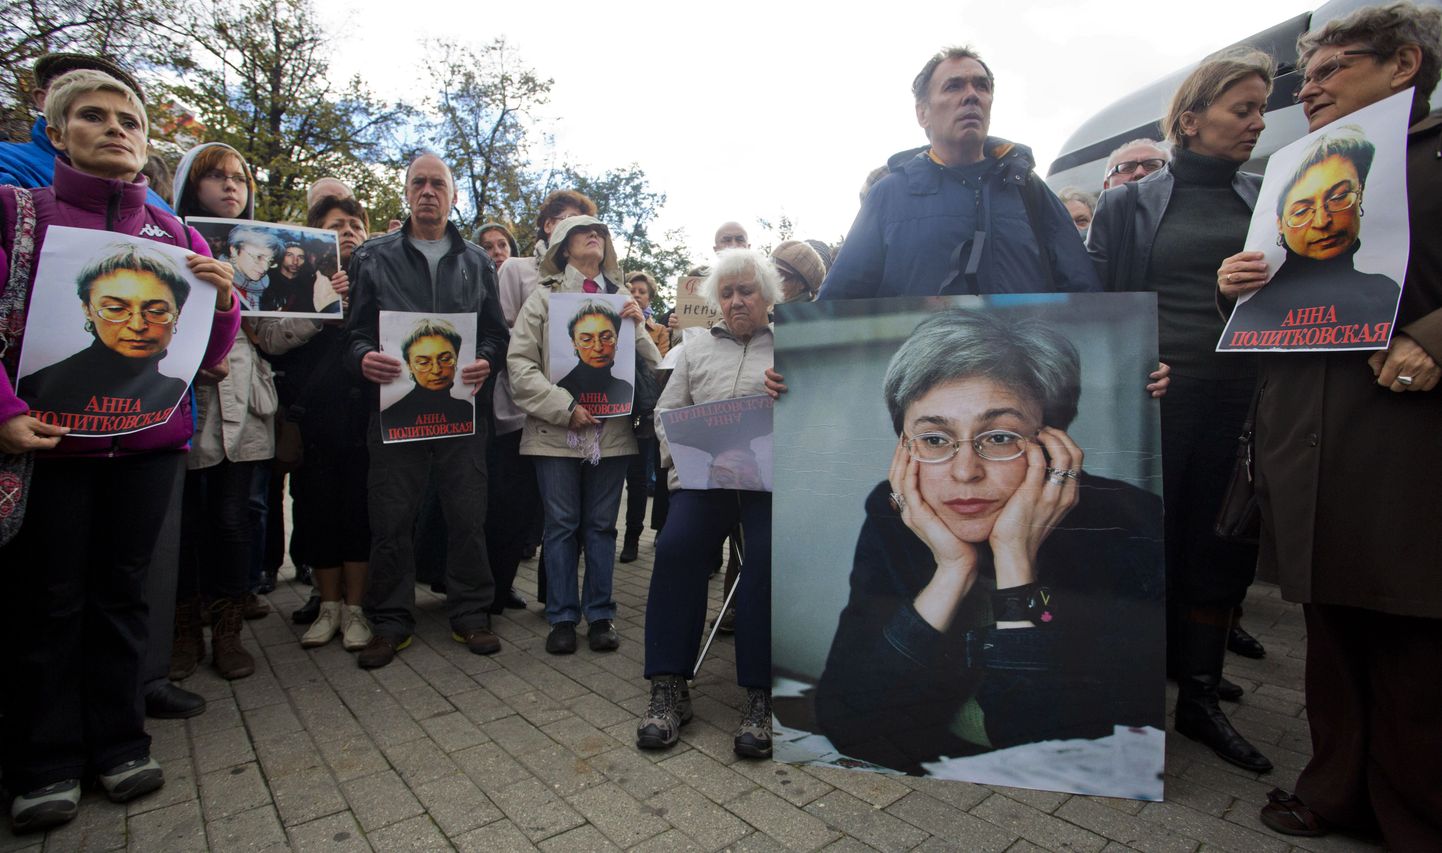 Demonstrators hold portrait of slain journalist Anna Politkovskaya during a rally marking the 6th anniversary of her death in central Moscow, on October 7, 2012, with Russian rights group Memorial founder, one of the nominees for this year's Nobel Peace Prize,  Svetlana Gannushkina (R) attending. Politkovskaya was gunned down in Moscow in 2006. AFP PHOTO / NOVAYA GAZETA/ EVGENY FELDMAN